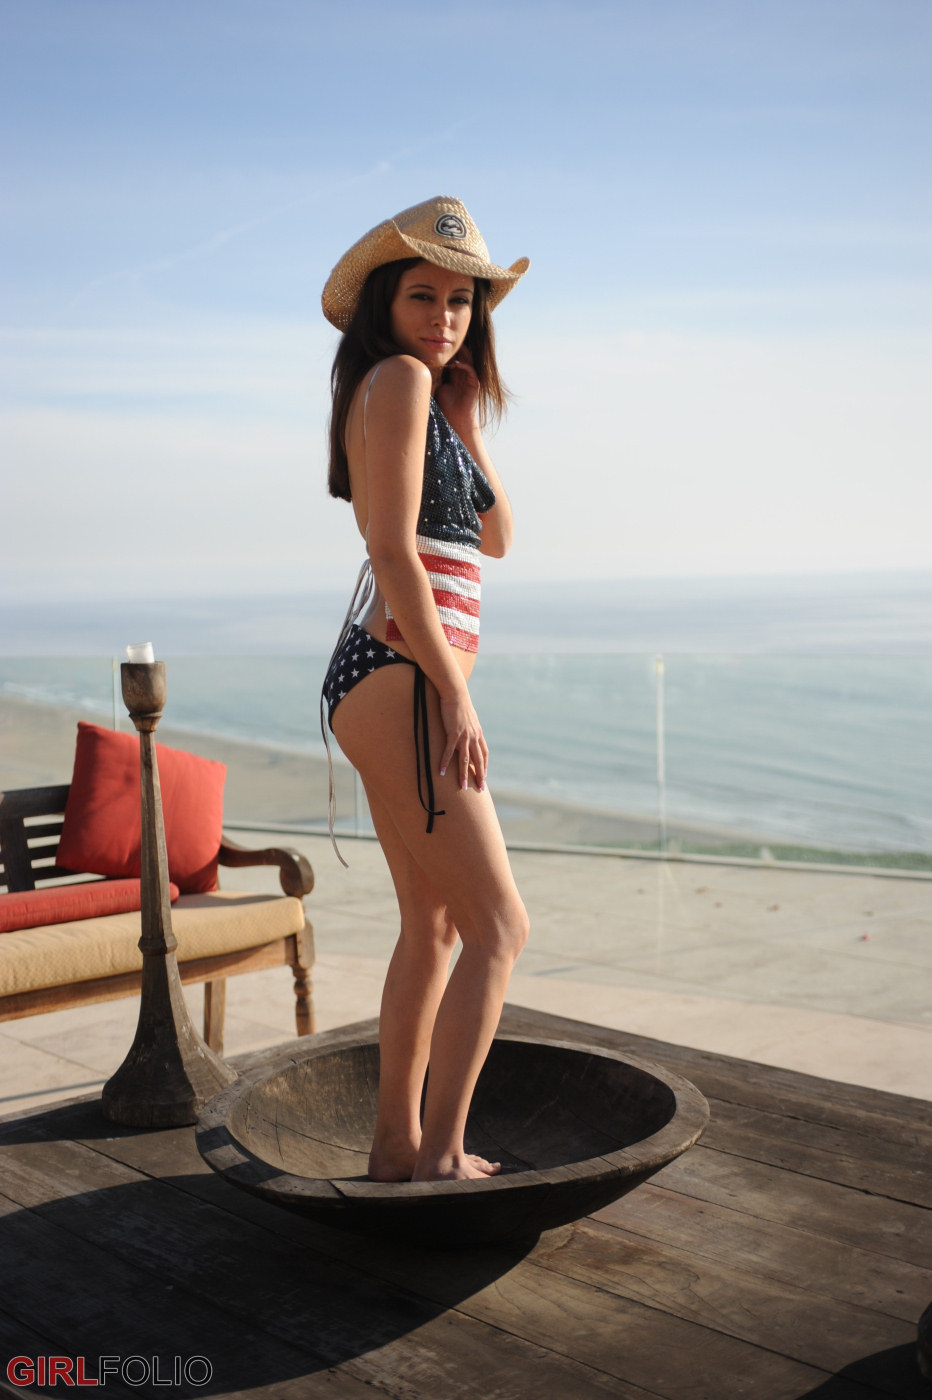 Angelina - Stars and Stripes - 05-dsc-3800 from Girl Folio